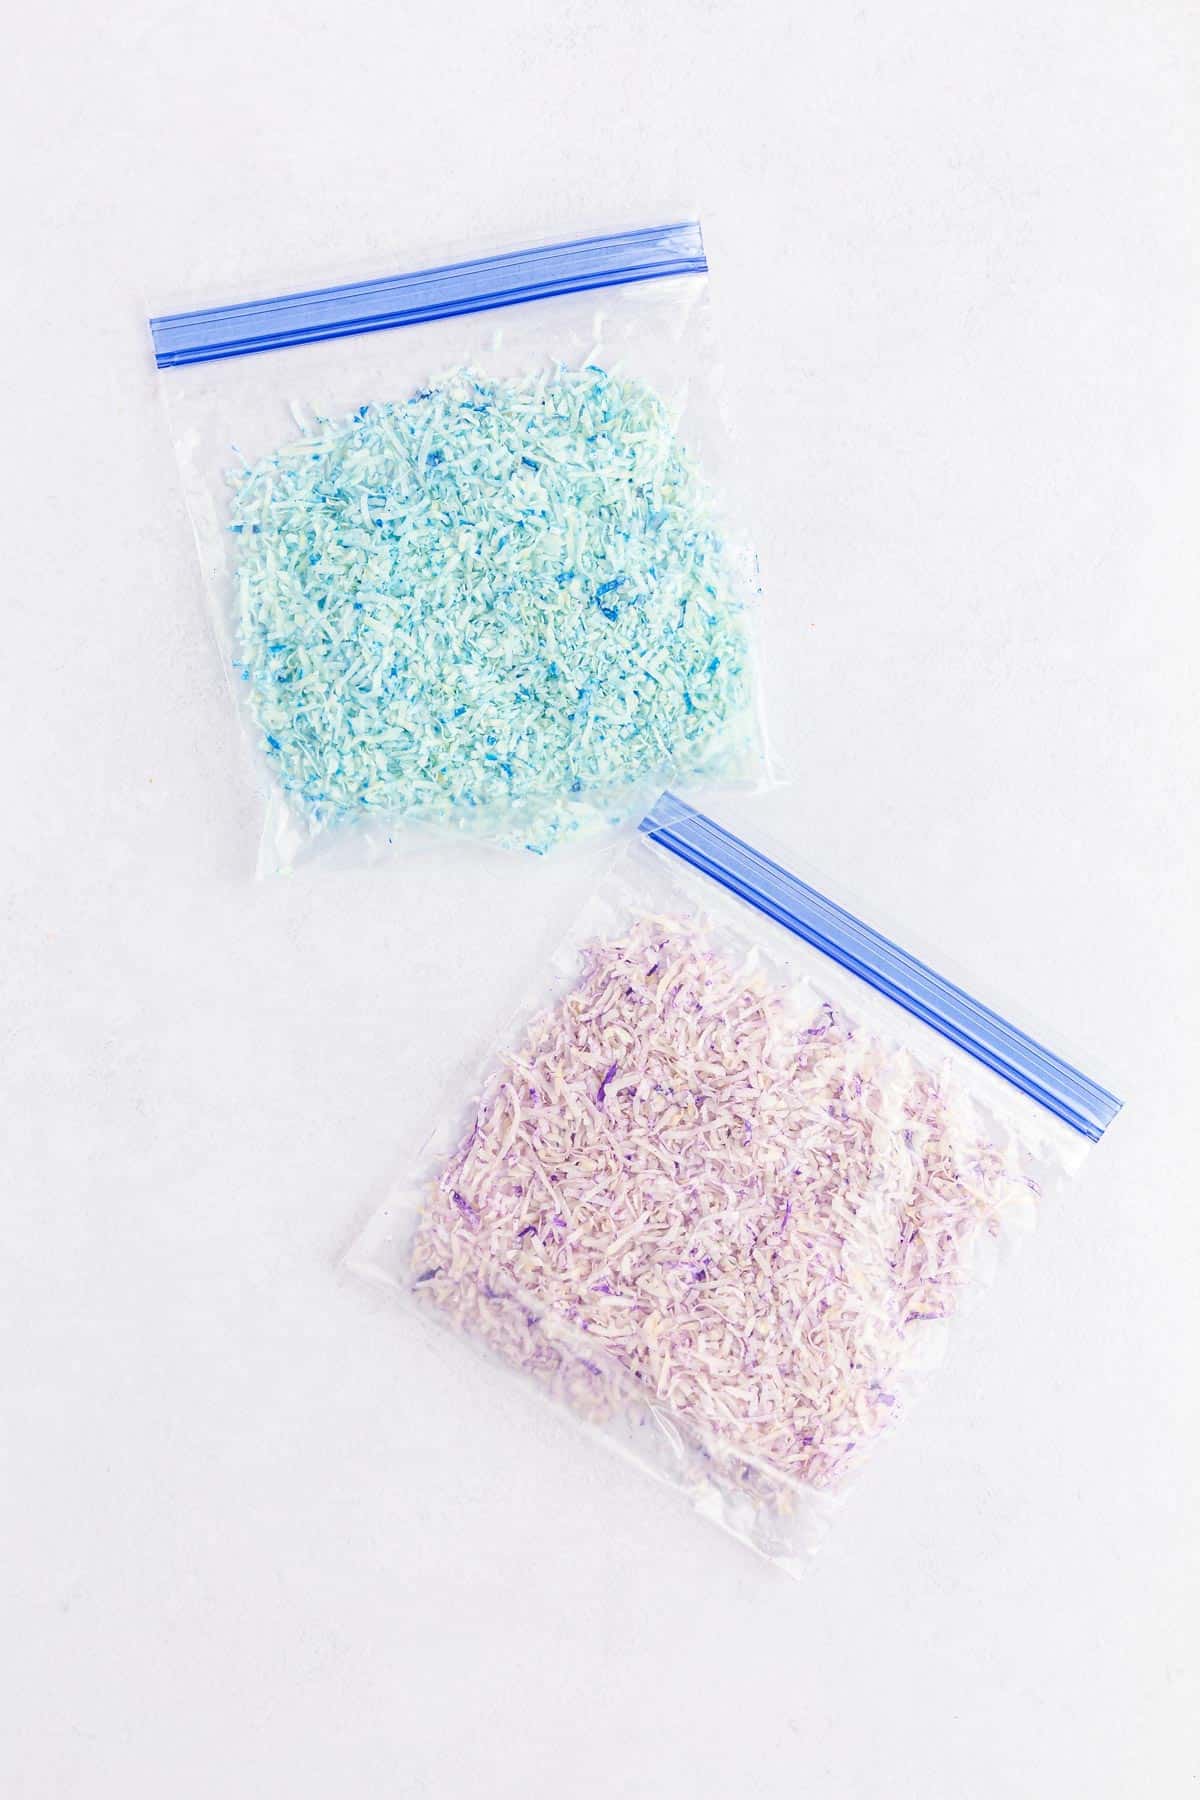 Blue and purple shredded coconut in ziploc bags.